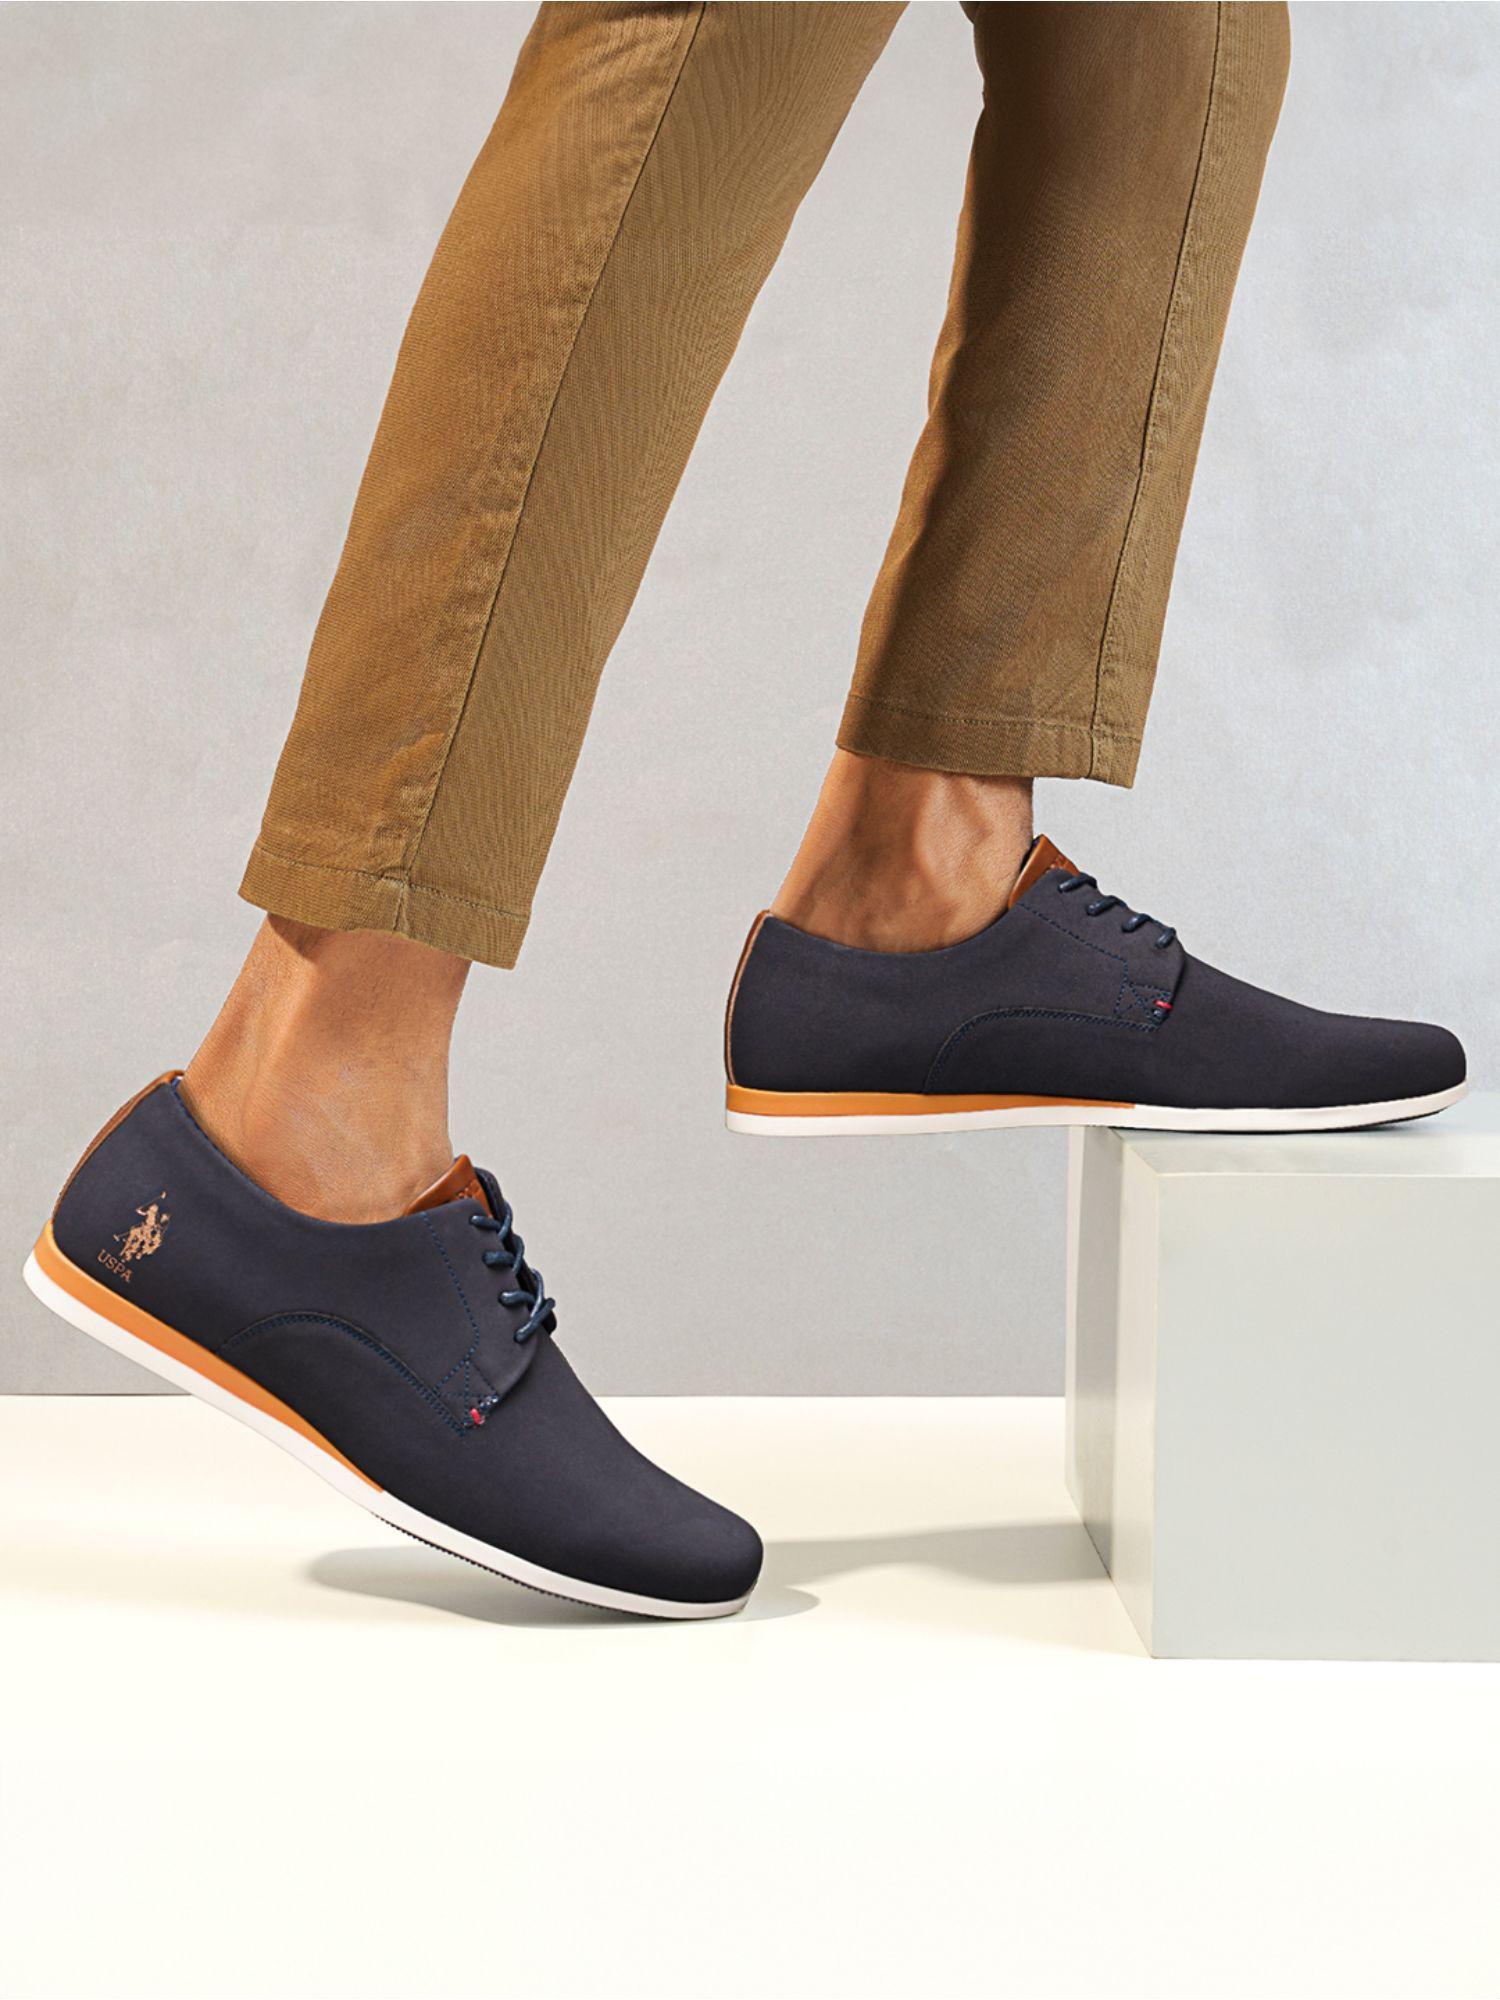 rune-2-0-mens-navy-casual-shoes